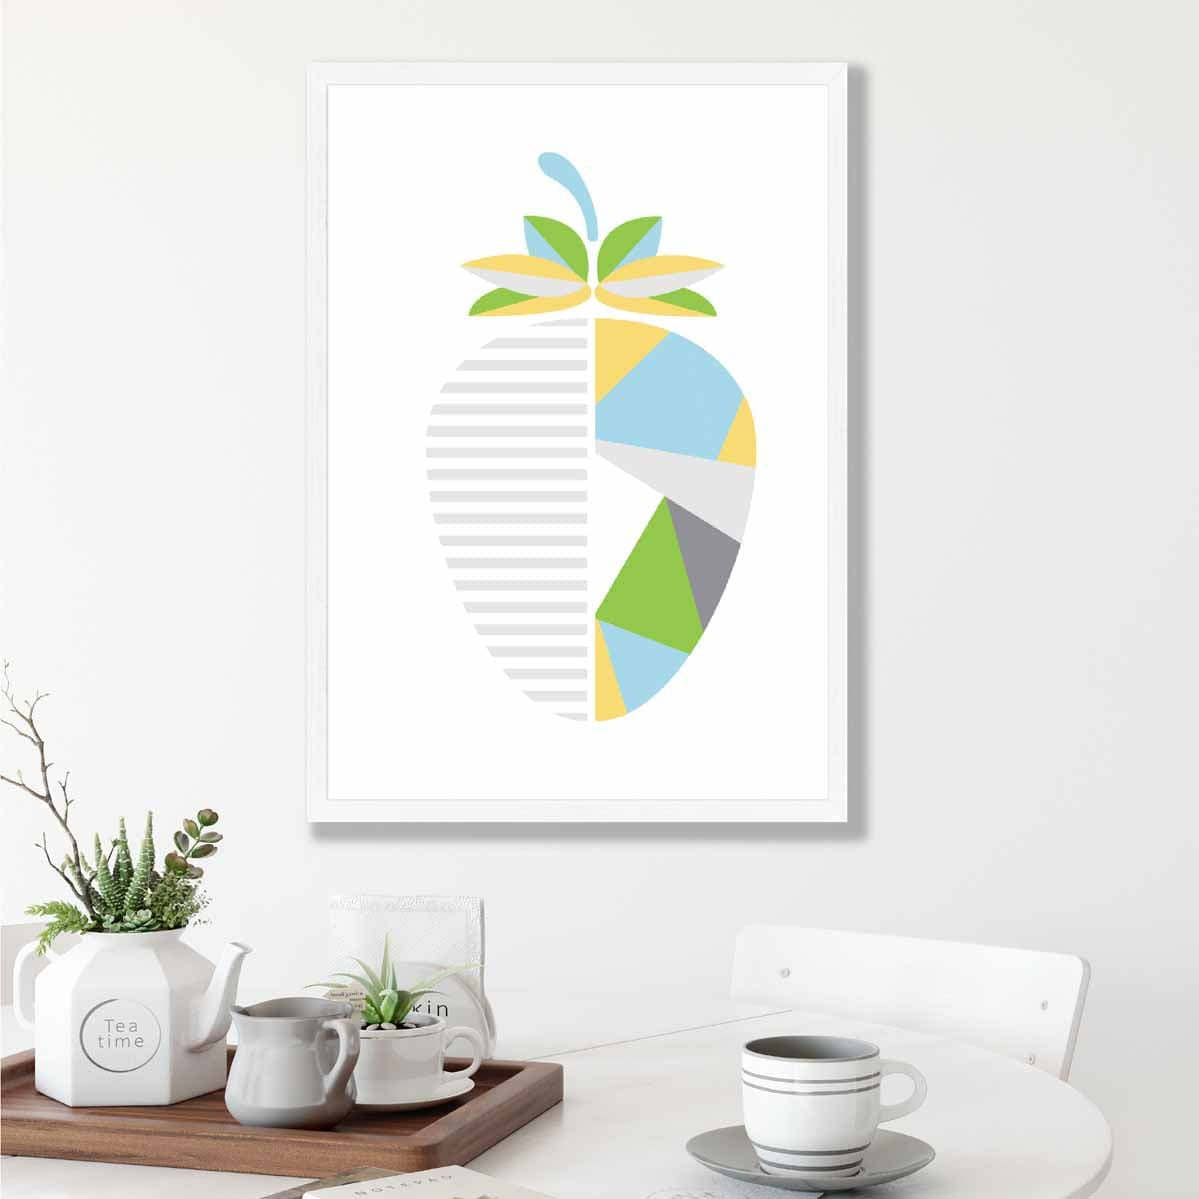 Geometric Fruit Poster of Strawberry in Yellow Blue Green